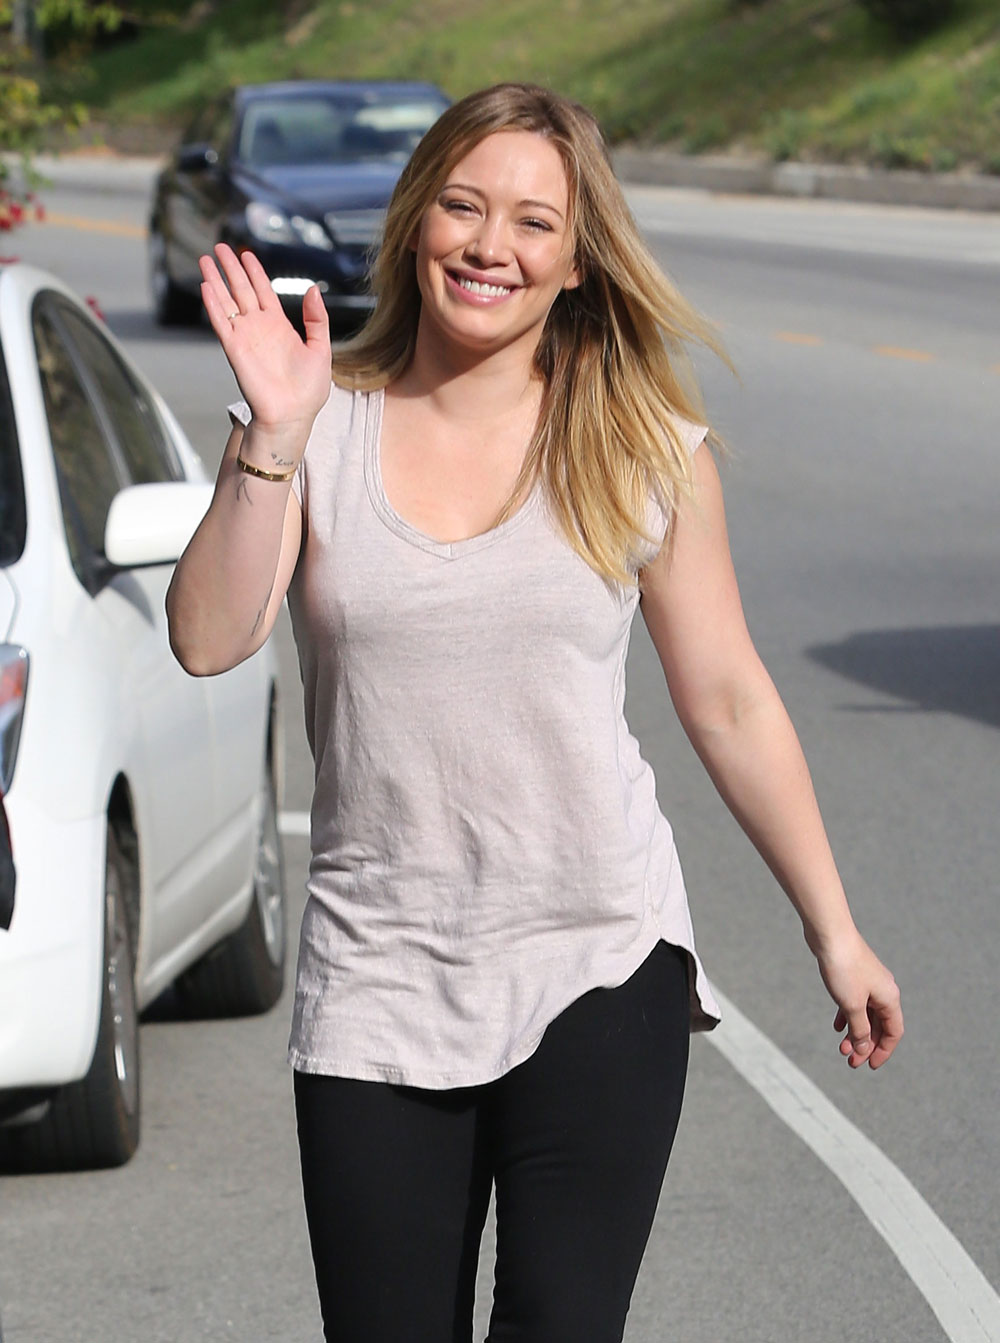 Hilary Duff got her lips done, and they’re really obvious: does she realize...